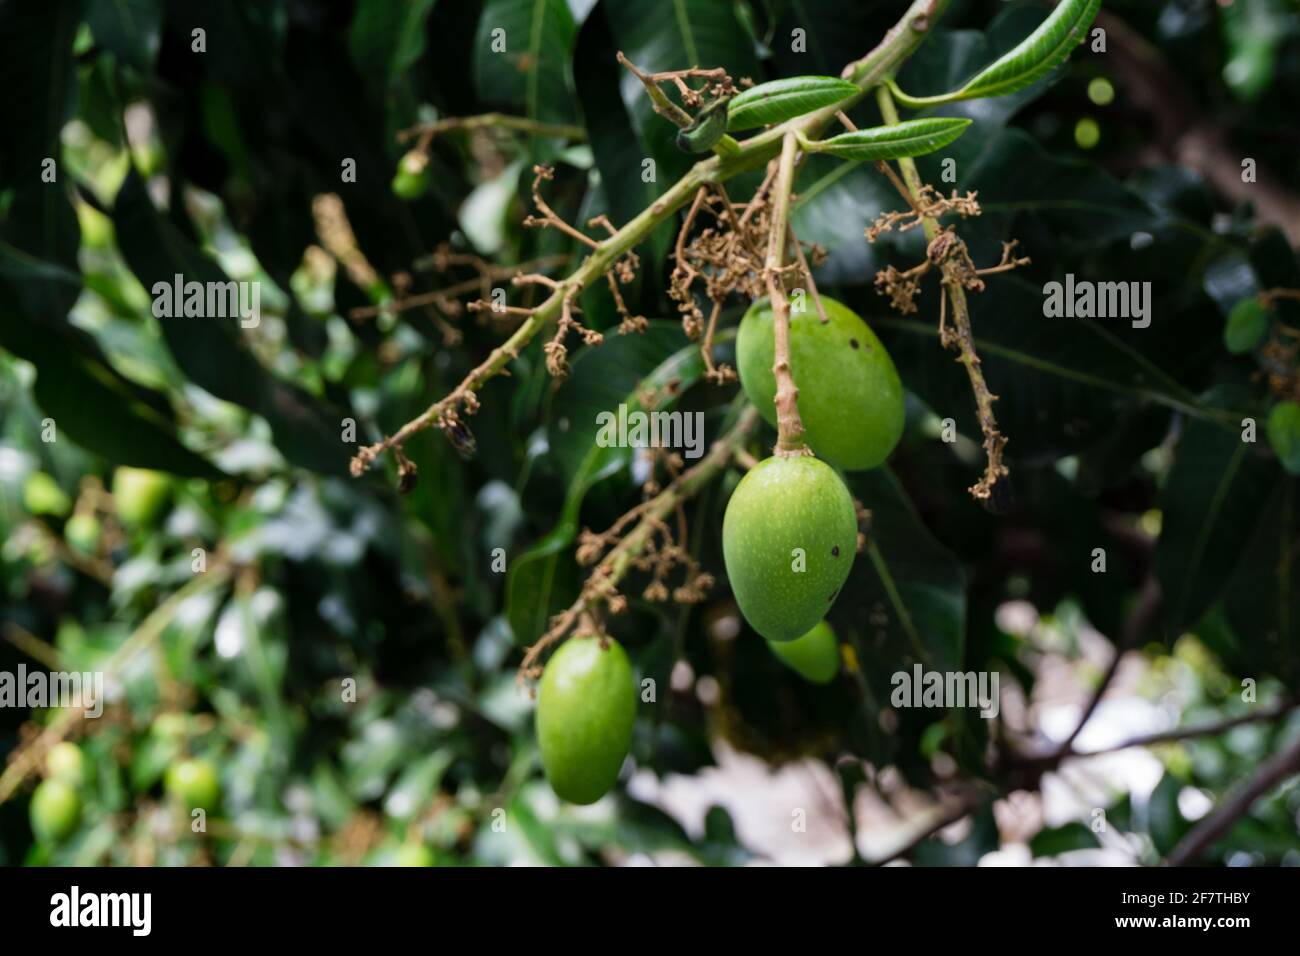 A close up shot of a raw mango hanging on a tree .Mangifera indica commonly known as mango. A shot of fruit bearing tree with small mangoes and its fl Stock Photo